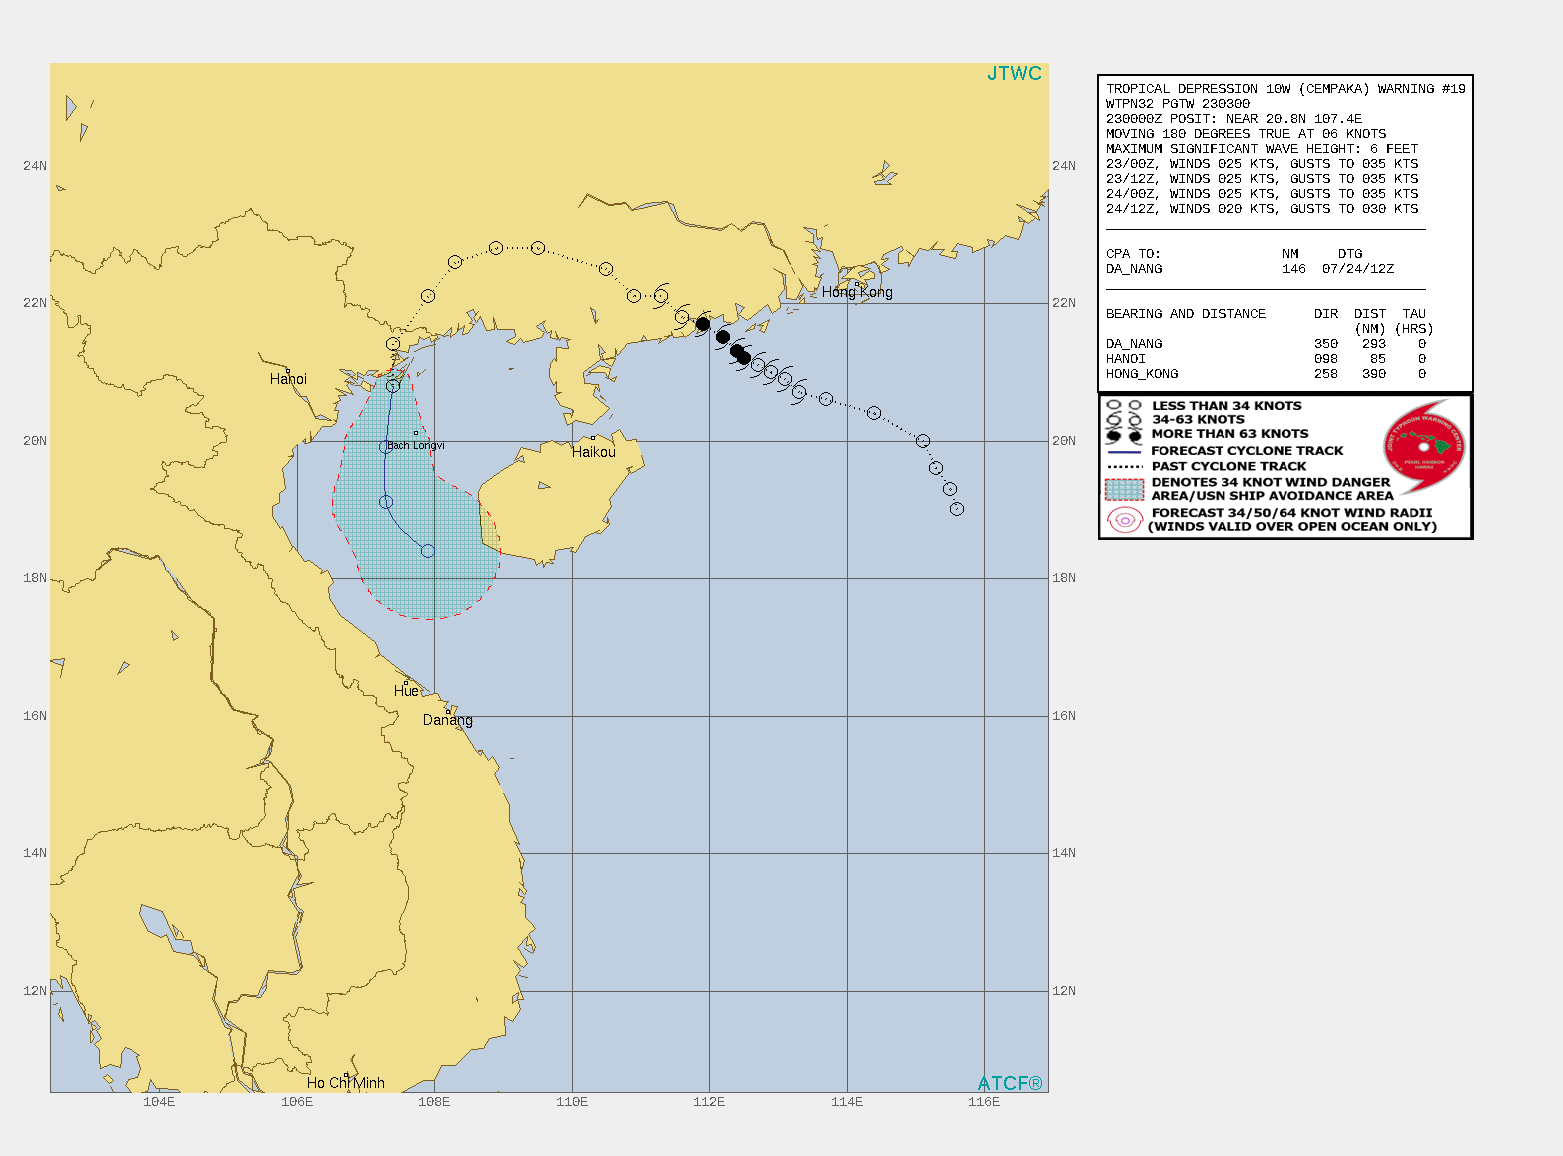 TD 10W(CEMPAKA). WARNING 19 ISSUED AT 23/03UTC.THERE ARE NO SIGNIFICANT CHANGES TO THE FORECAST FROM THE PREVIOUS WARNING.  FORECAST DISCUSSION: TD 10W IS NOT EXPECTED TO REGENERATE TO TROPICAL STORM STATUS DUE TO HIGH VERTICAL WIND SHEAR OVER THE GULF OF TONKIN. THE WARM WATERS OF THE GULF OF TONKIN WILL SUSTAIN THE VORTEX THROUGH TAU 24 BUT EVENTUALLY THE WINDSHEAR WILL OVERCOME THE SYSTEM.